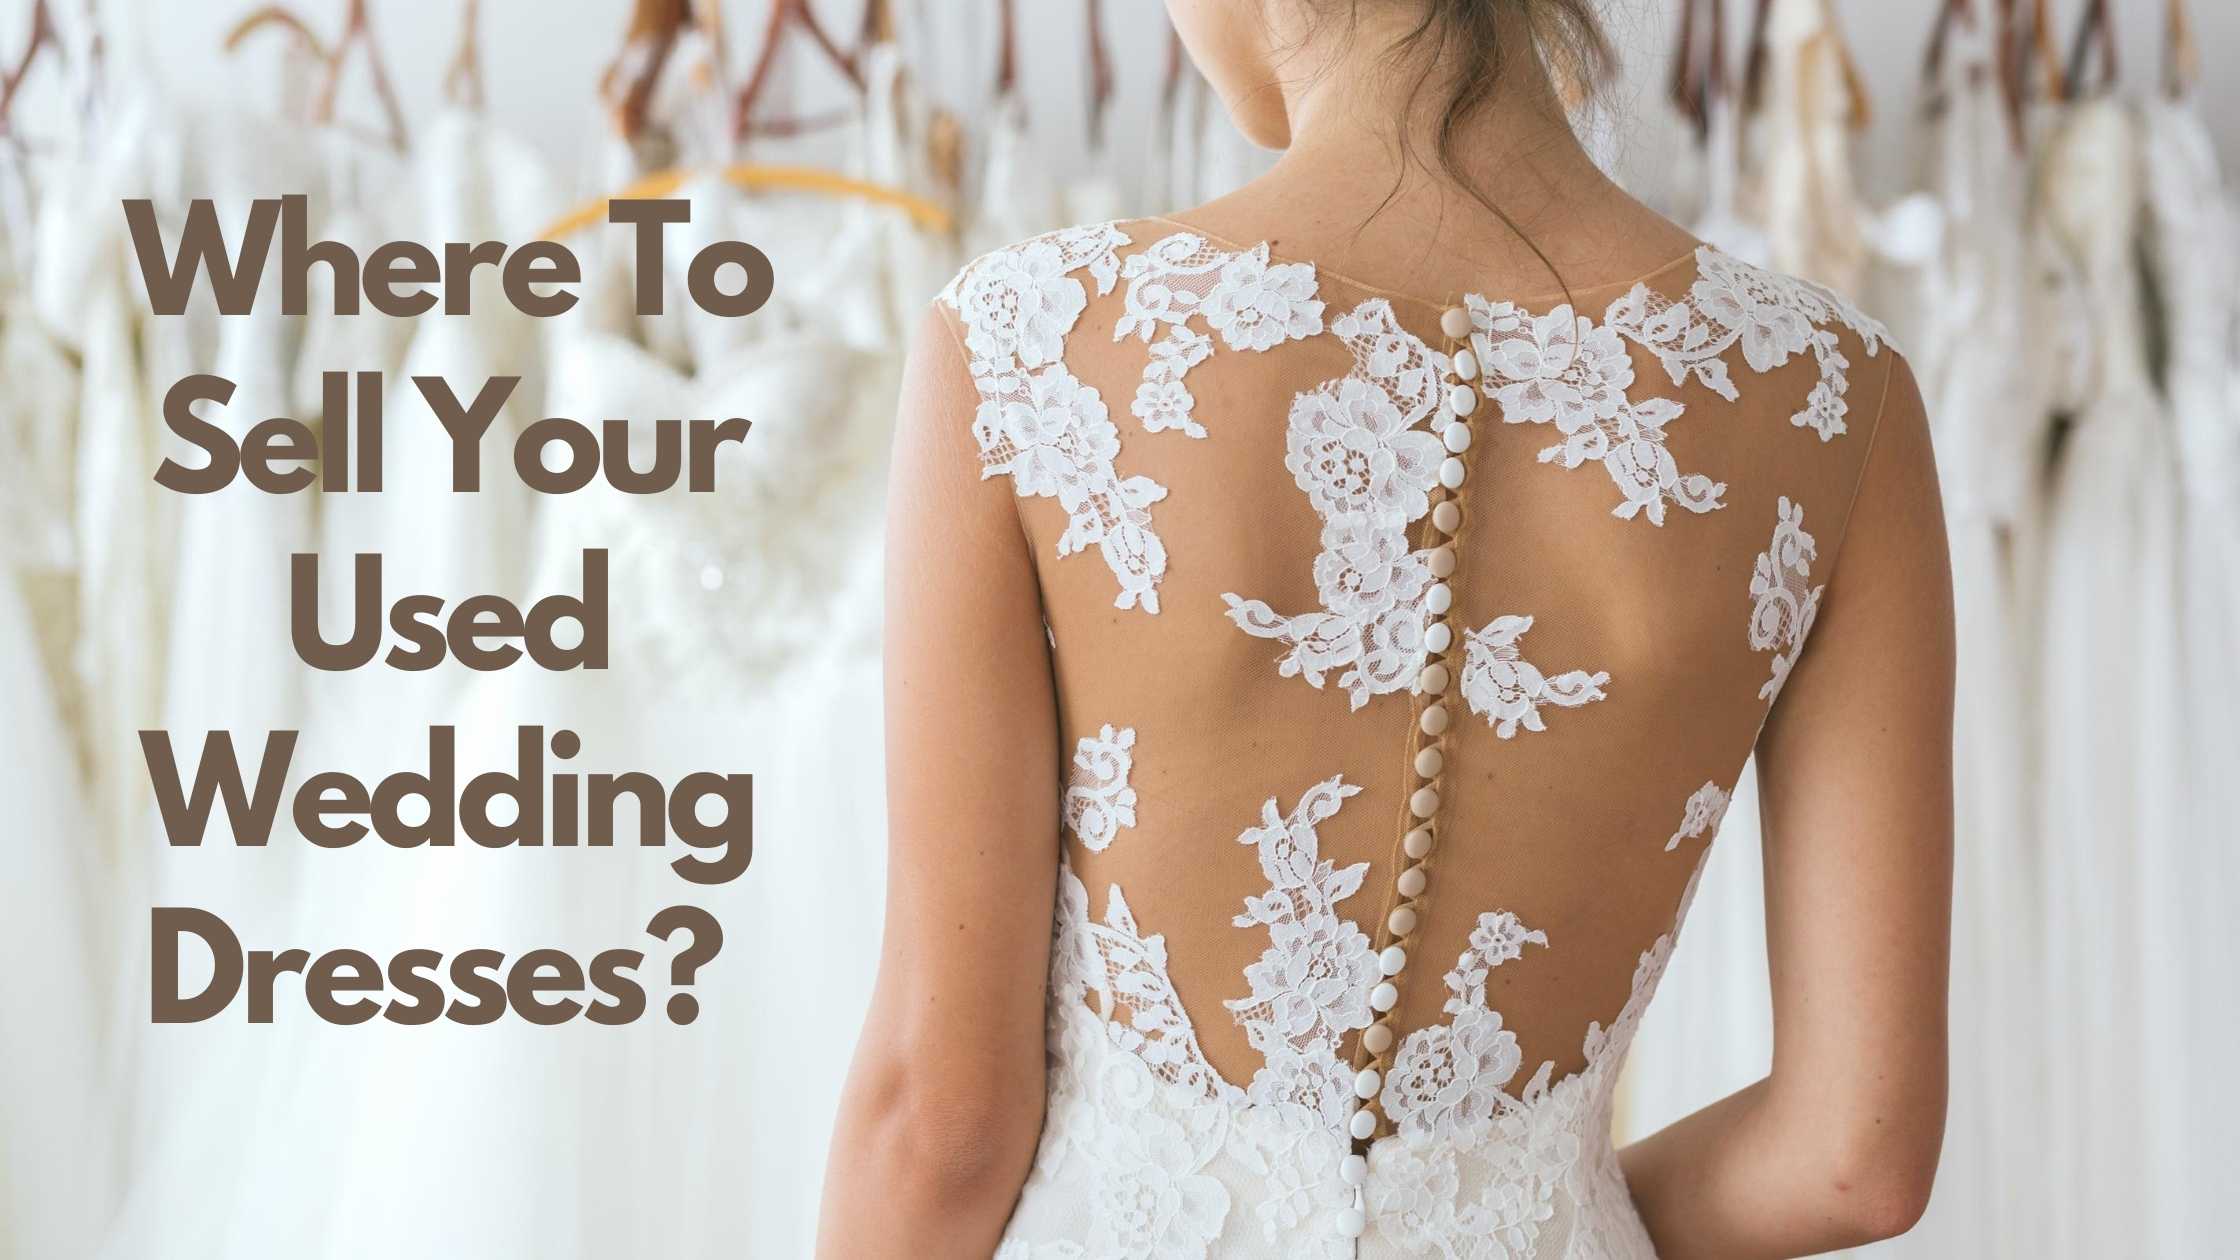 Here’s Where to Sell Your Used Wedding Dresses | Sheepbuy Blog